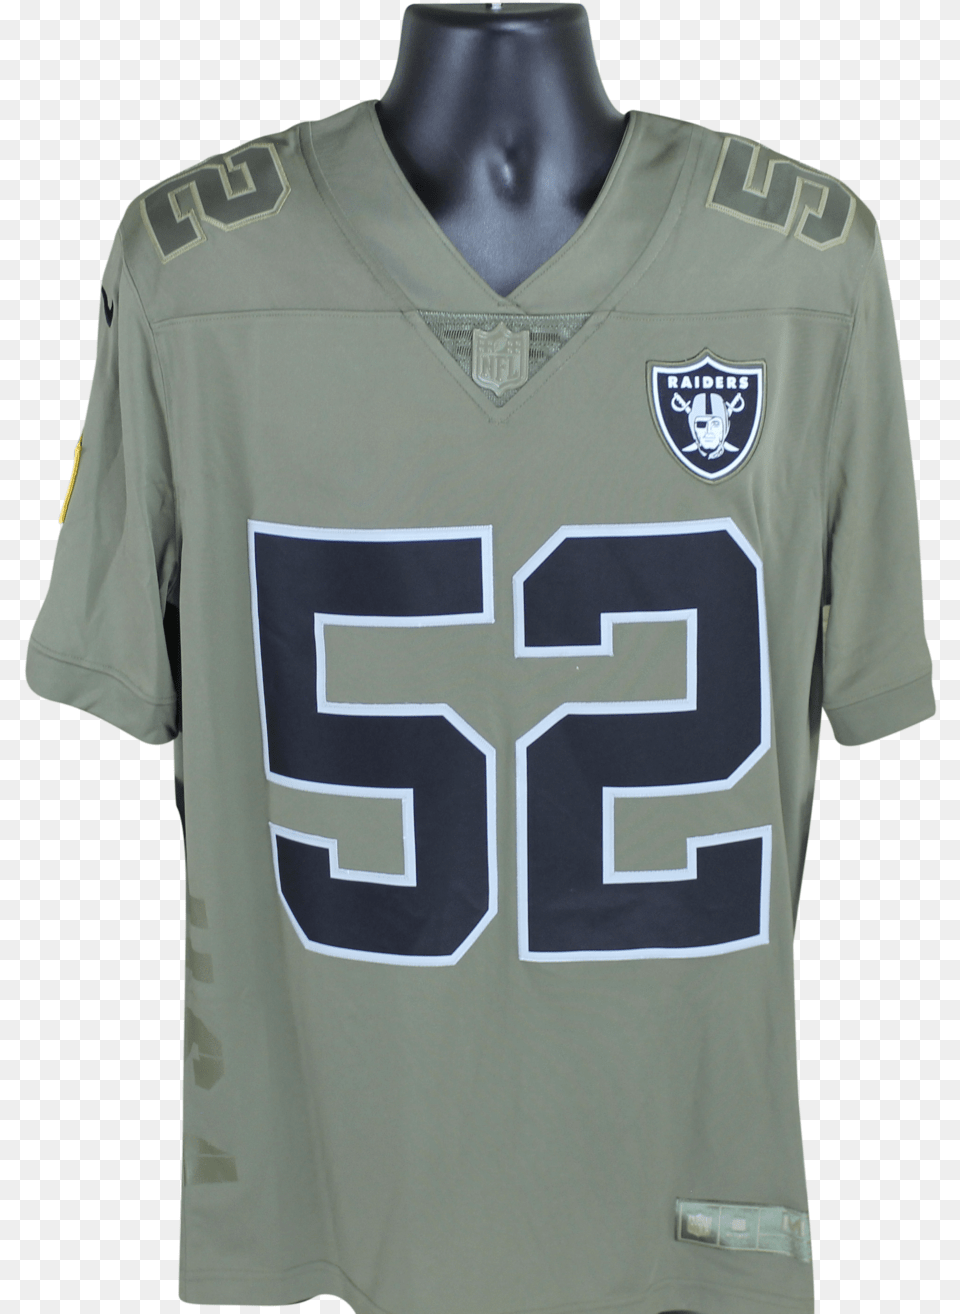 Khalil Mack Autographed Oakland Raiders Salute To Service Sports Jersey, Clothing, Shirt, T-shirt Free Png